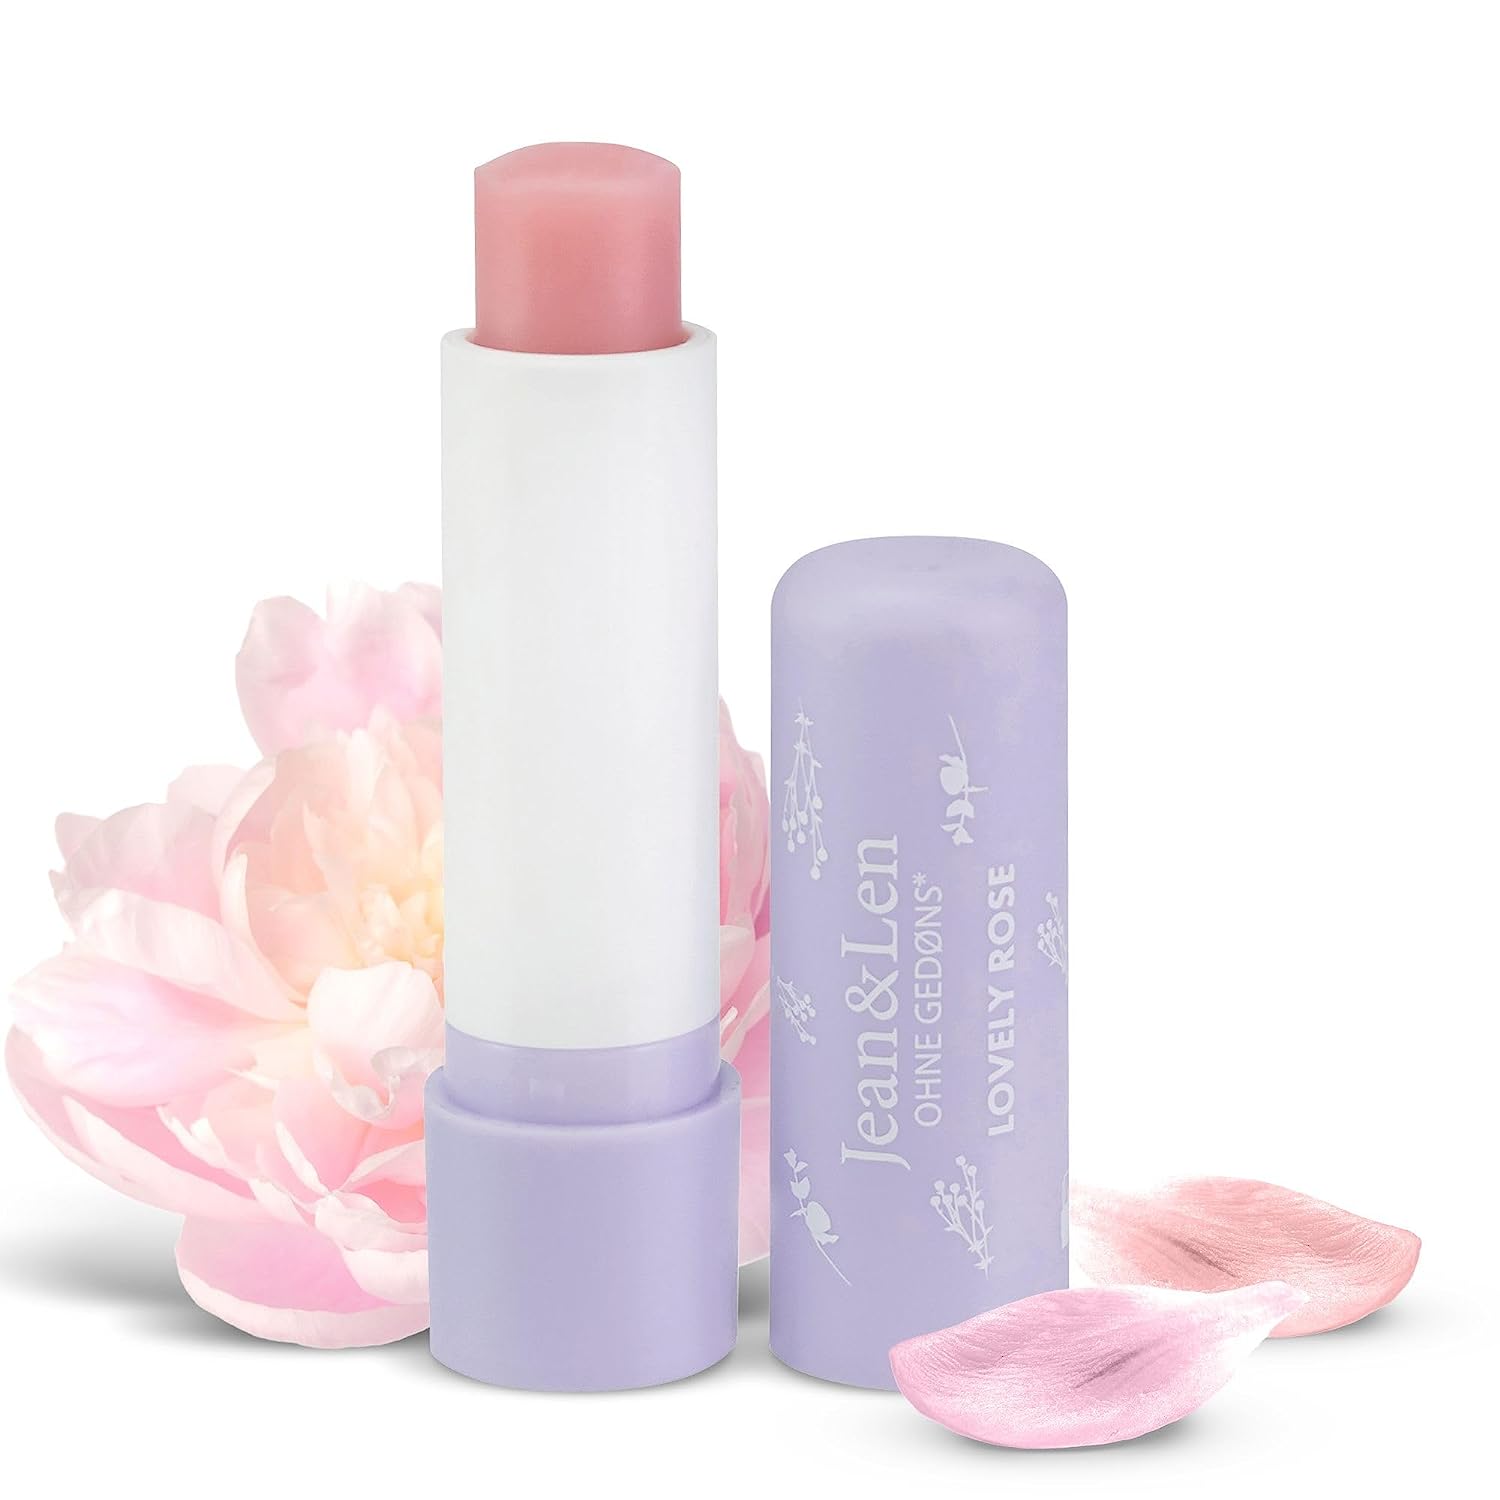 Jean & Len Intensive Nourishing Lip Balm, for Smoothly Soft Lips, Protects Lips from Drying Out, with Rose Petal Wax & Organic Argan Oil, Lip Balm, Lip Balm, No Mineral Oil, Vegan, 4.7 g